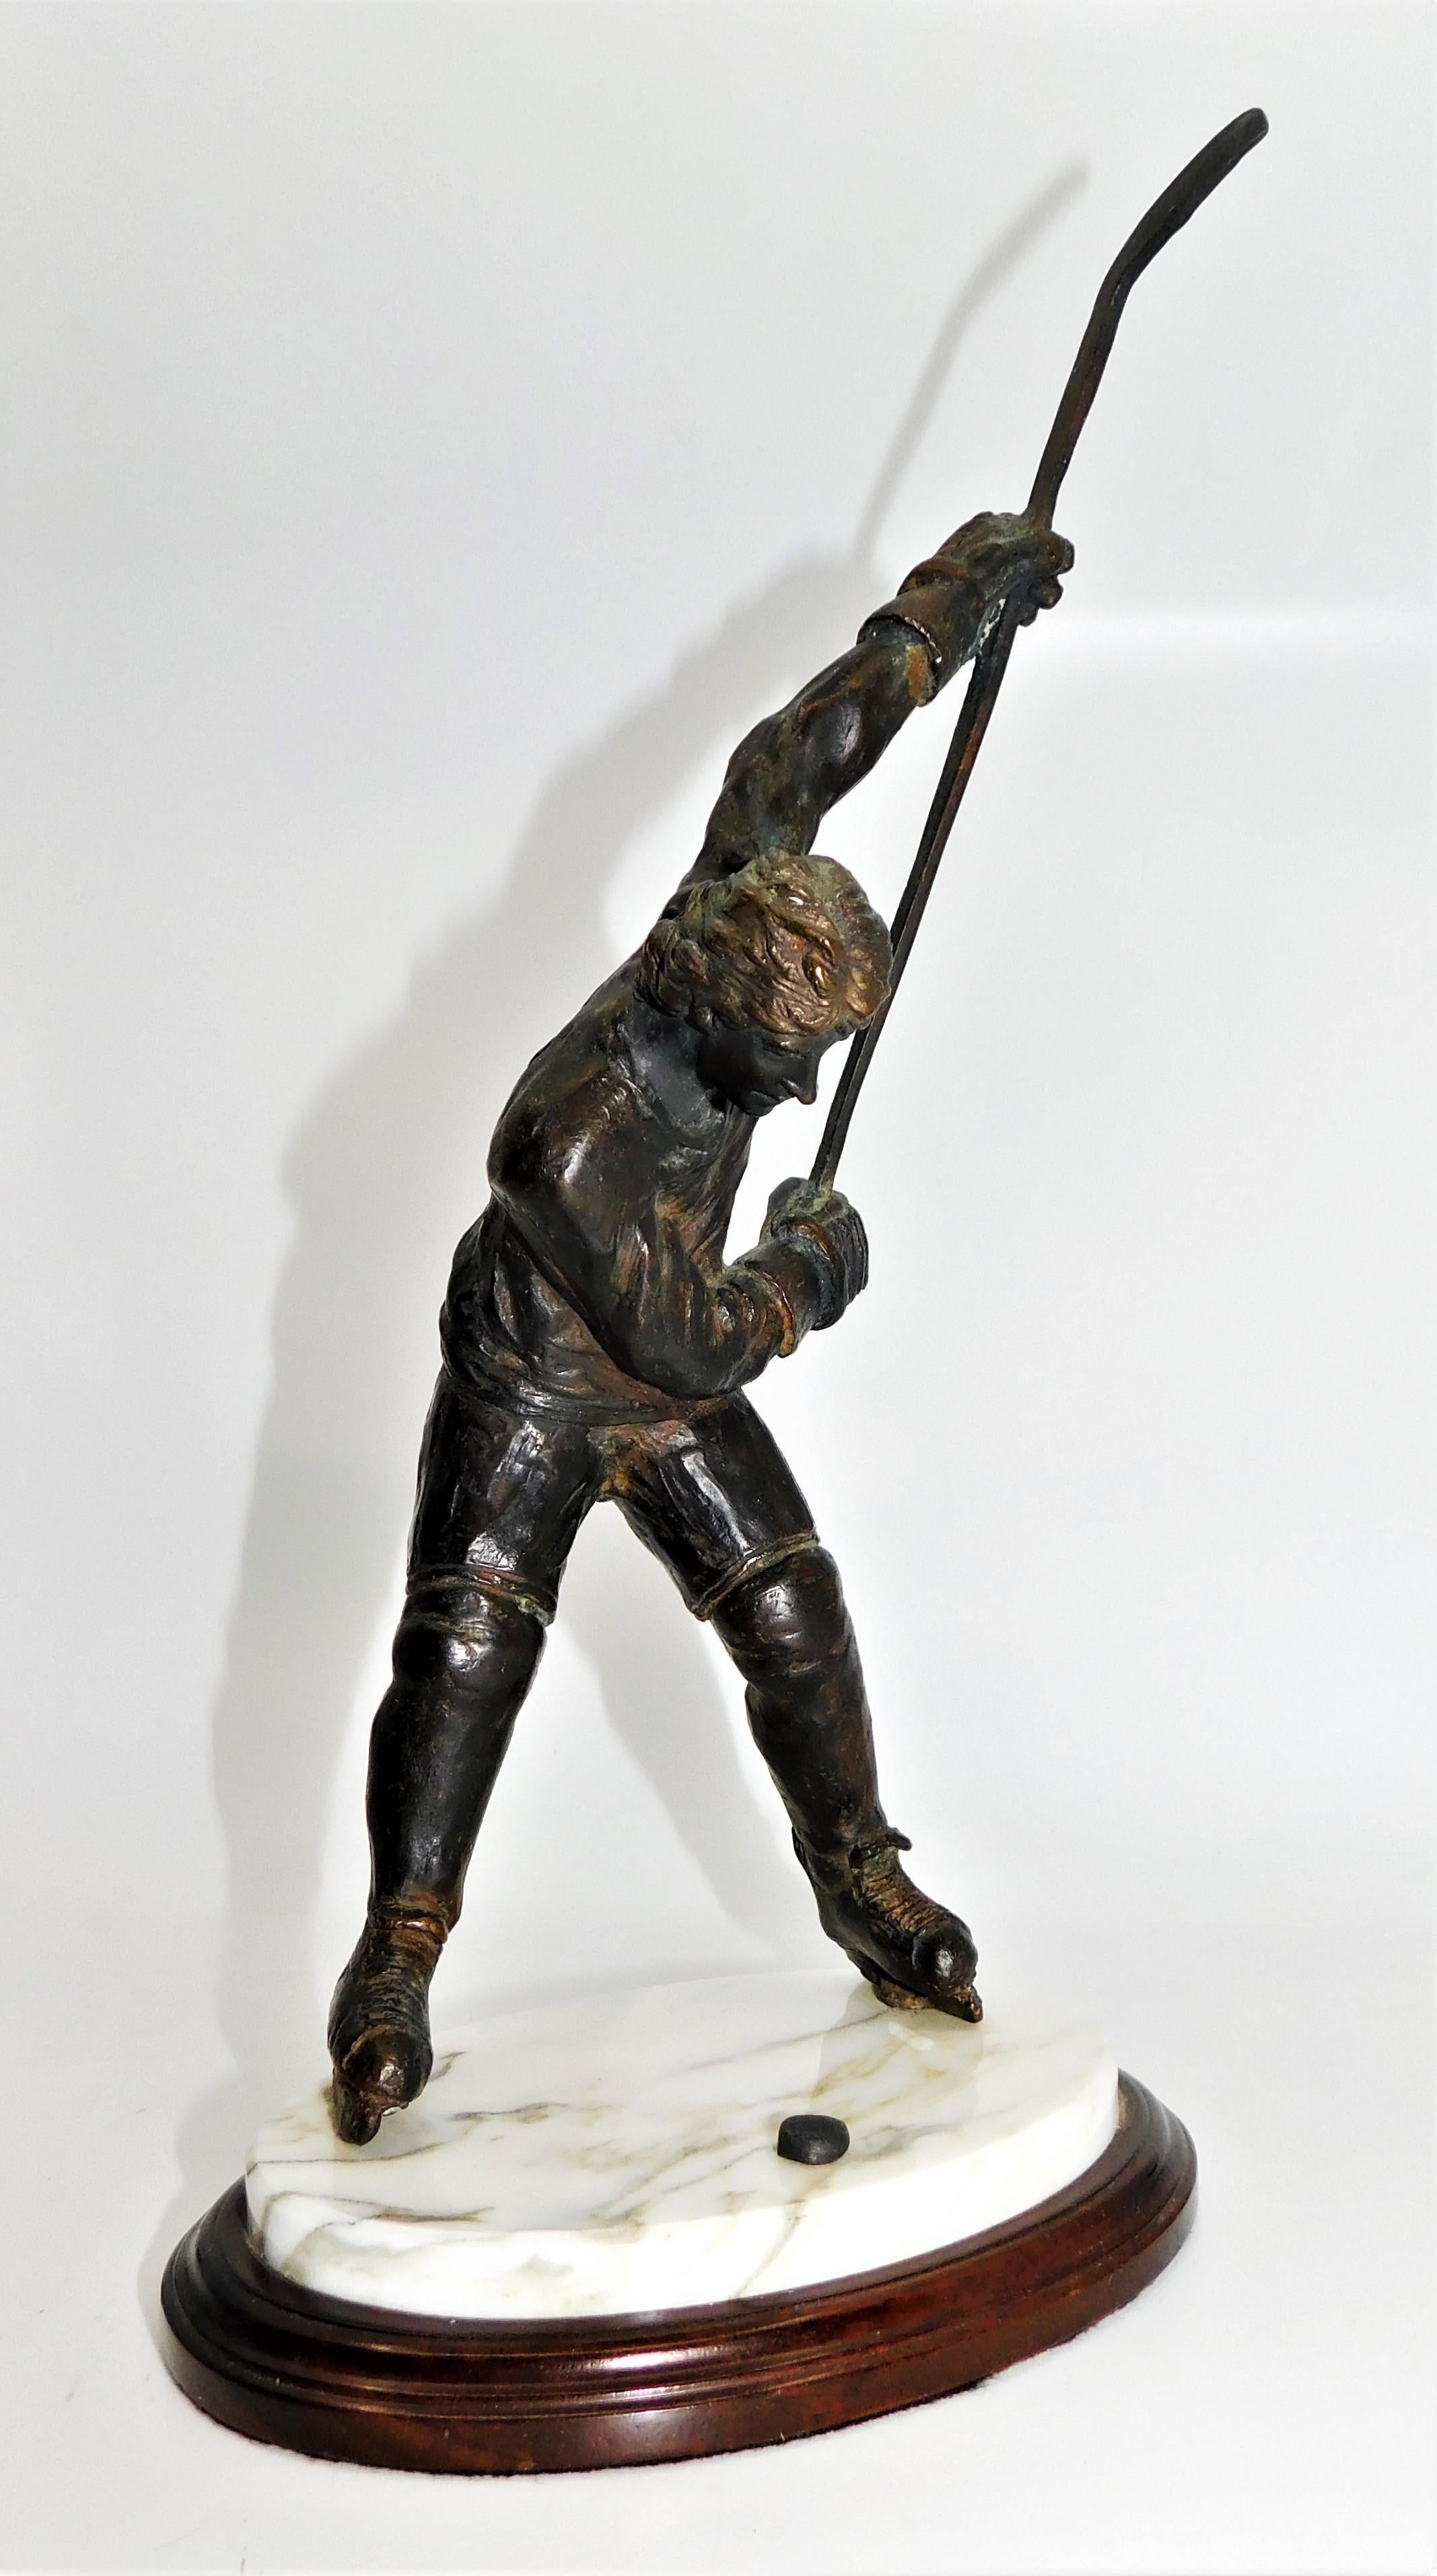 This dignified bronze statue depicts the greatest player in the history hockey, the iconic Wayne Gretzky. Produced in 1985 and limited to a mere 200 copies - production halted, with only 5 examples believed to exist in the hobby, with Wayne himself